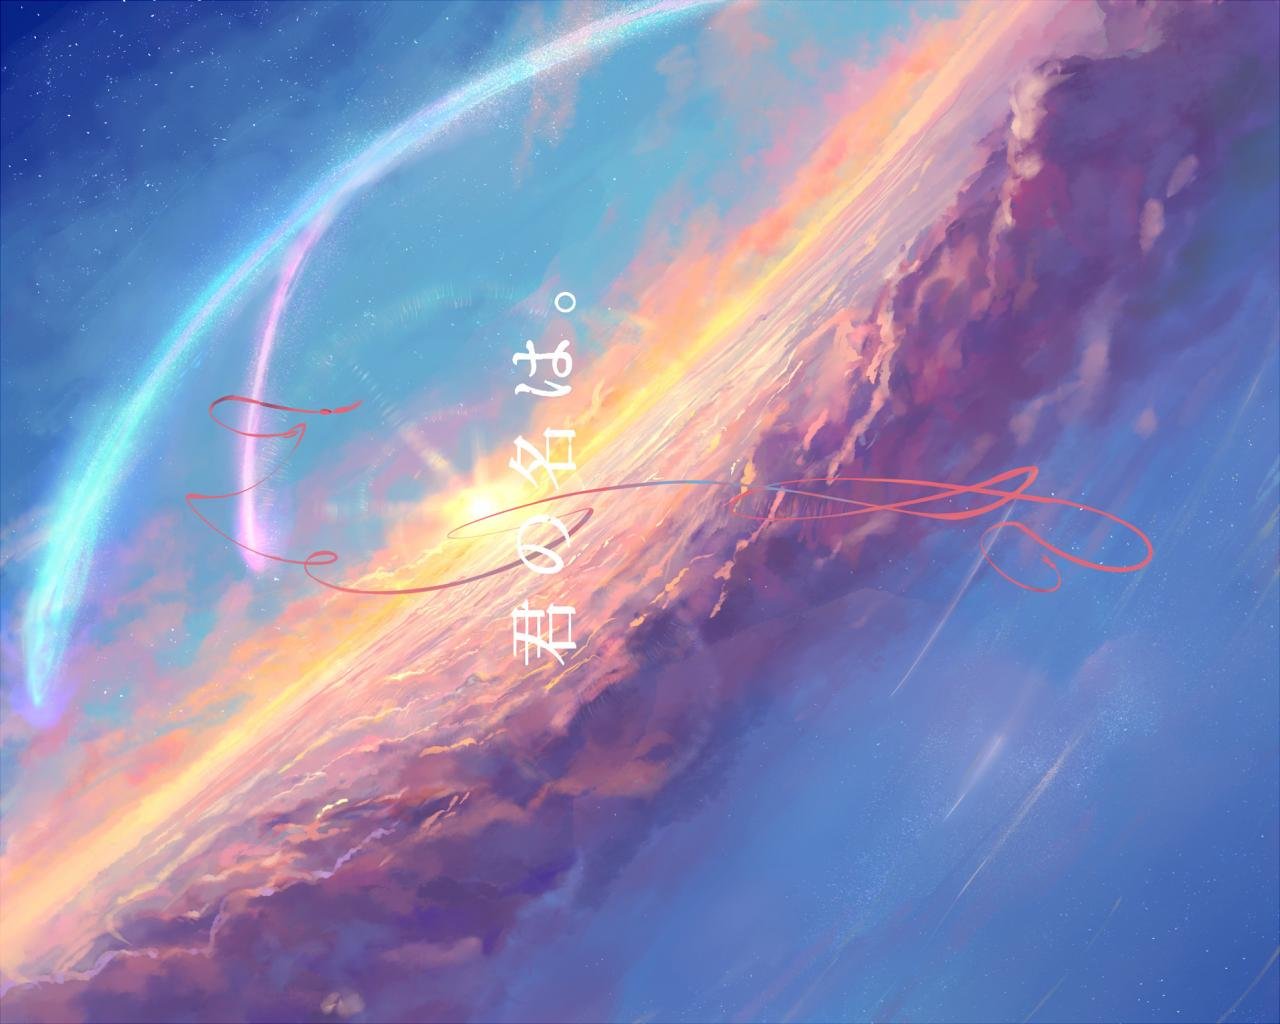 Your Name Wallpapers 1280x1024 Desktop Backgrounds